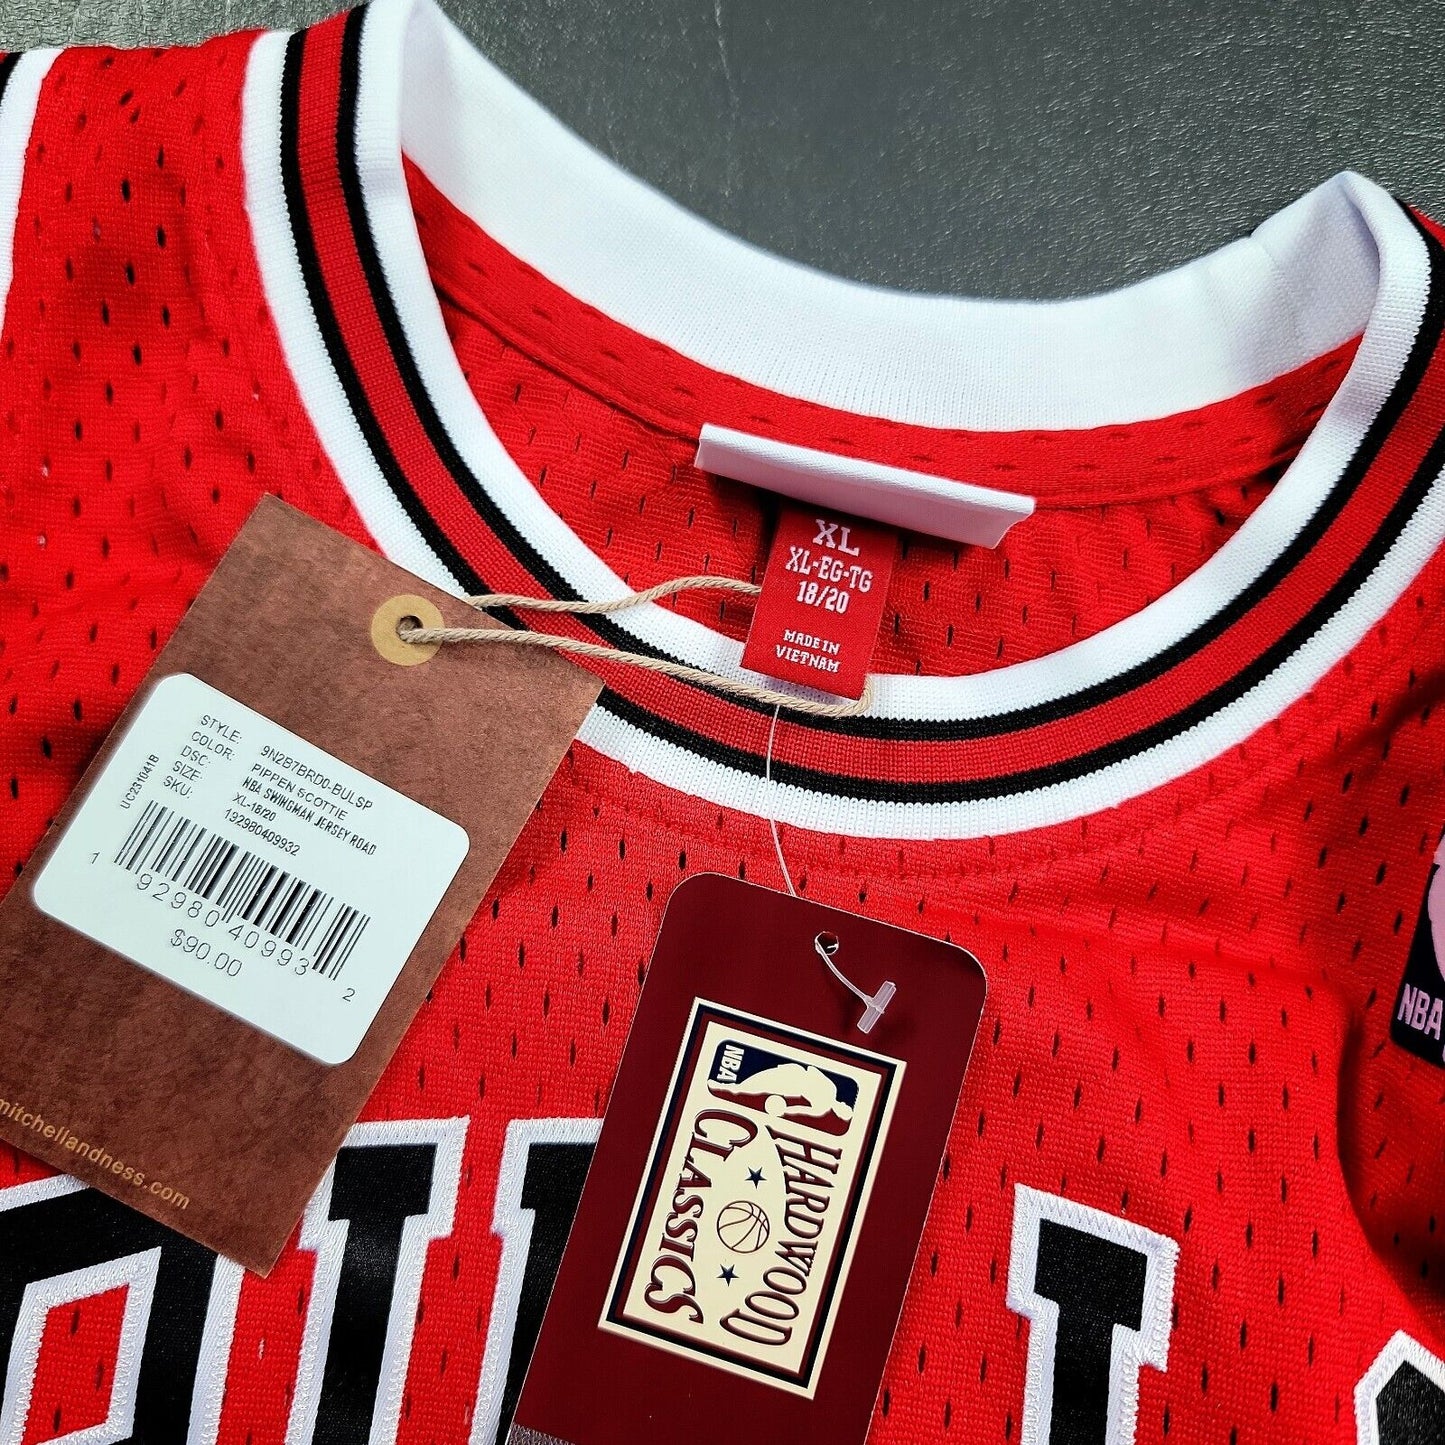 100% Authentic Scottie Pippen Mitchell Ness 97 98 Bulls Jersey XL 18/20 Youth